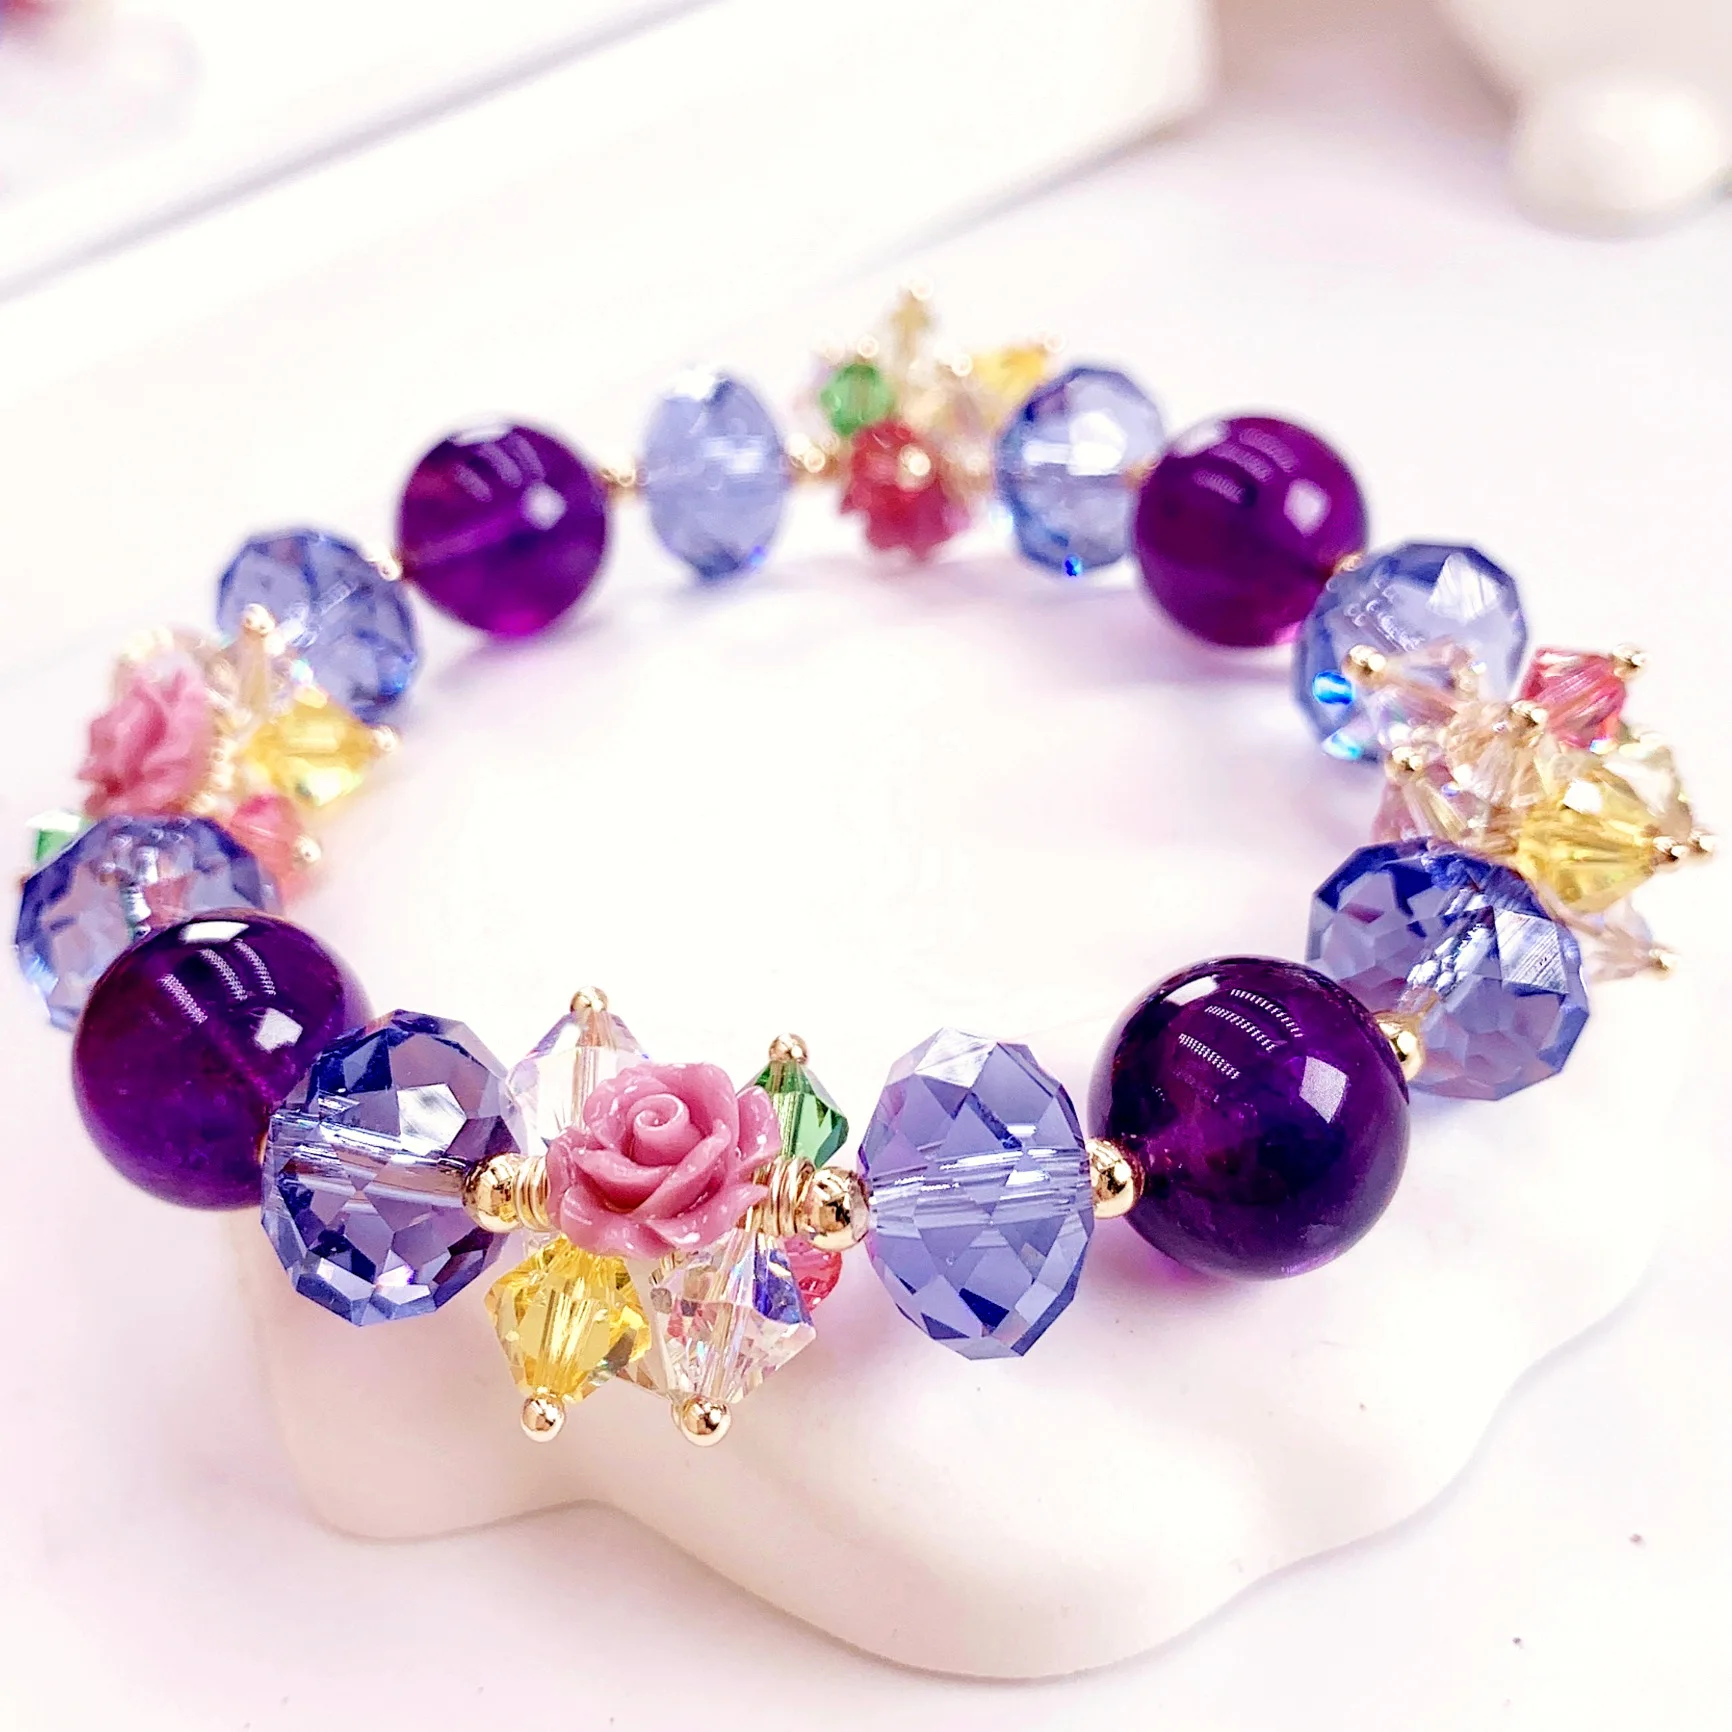 Original Design High Quality Natural Amethyst Bracelets for Women Girls Flower Fairy Crystal Bangle Factory Direct Sales Jewelry